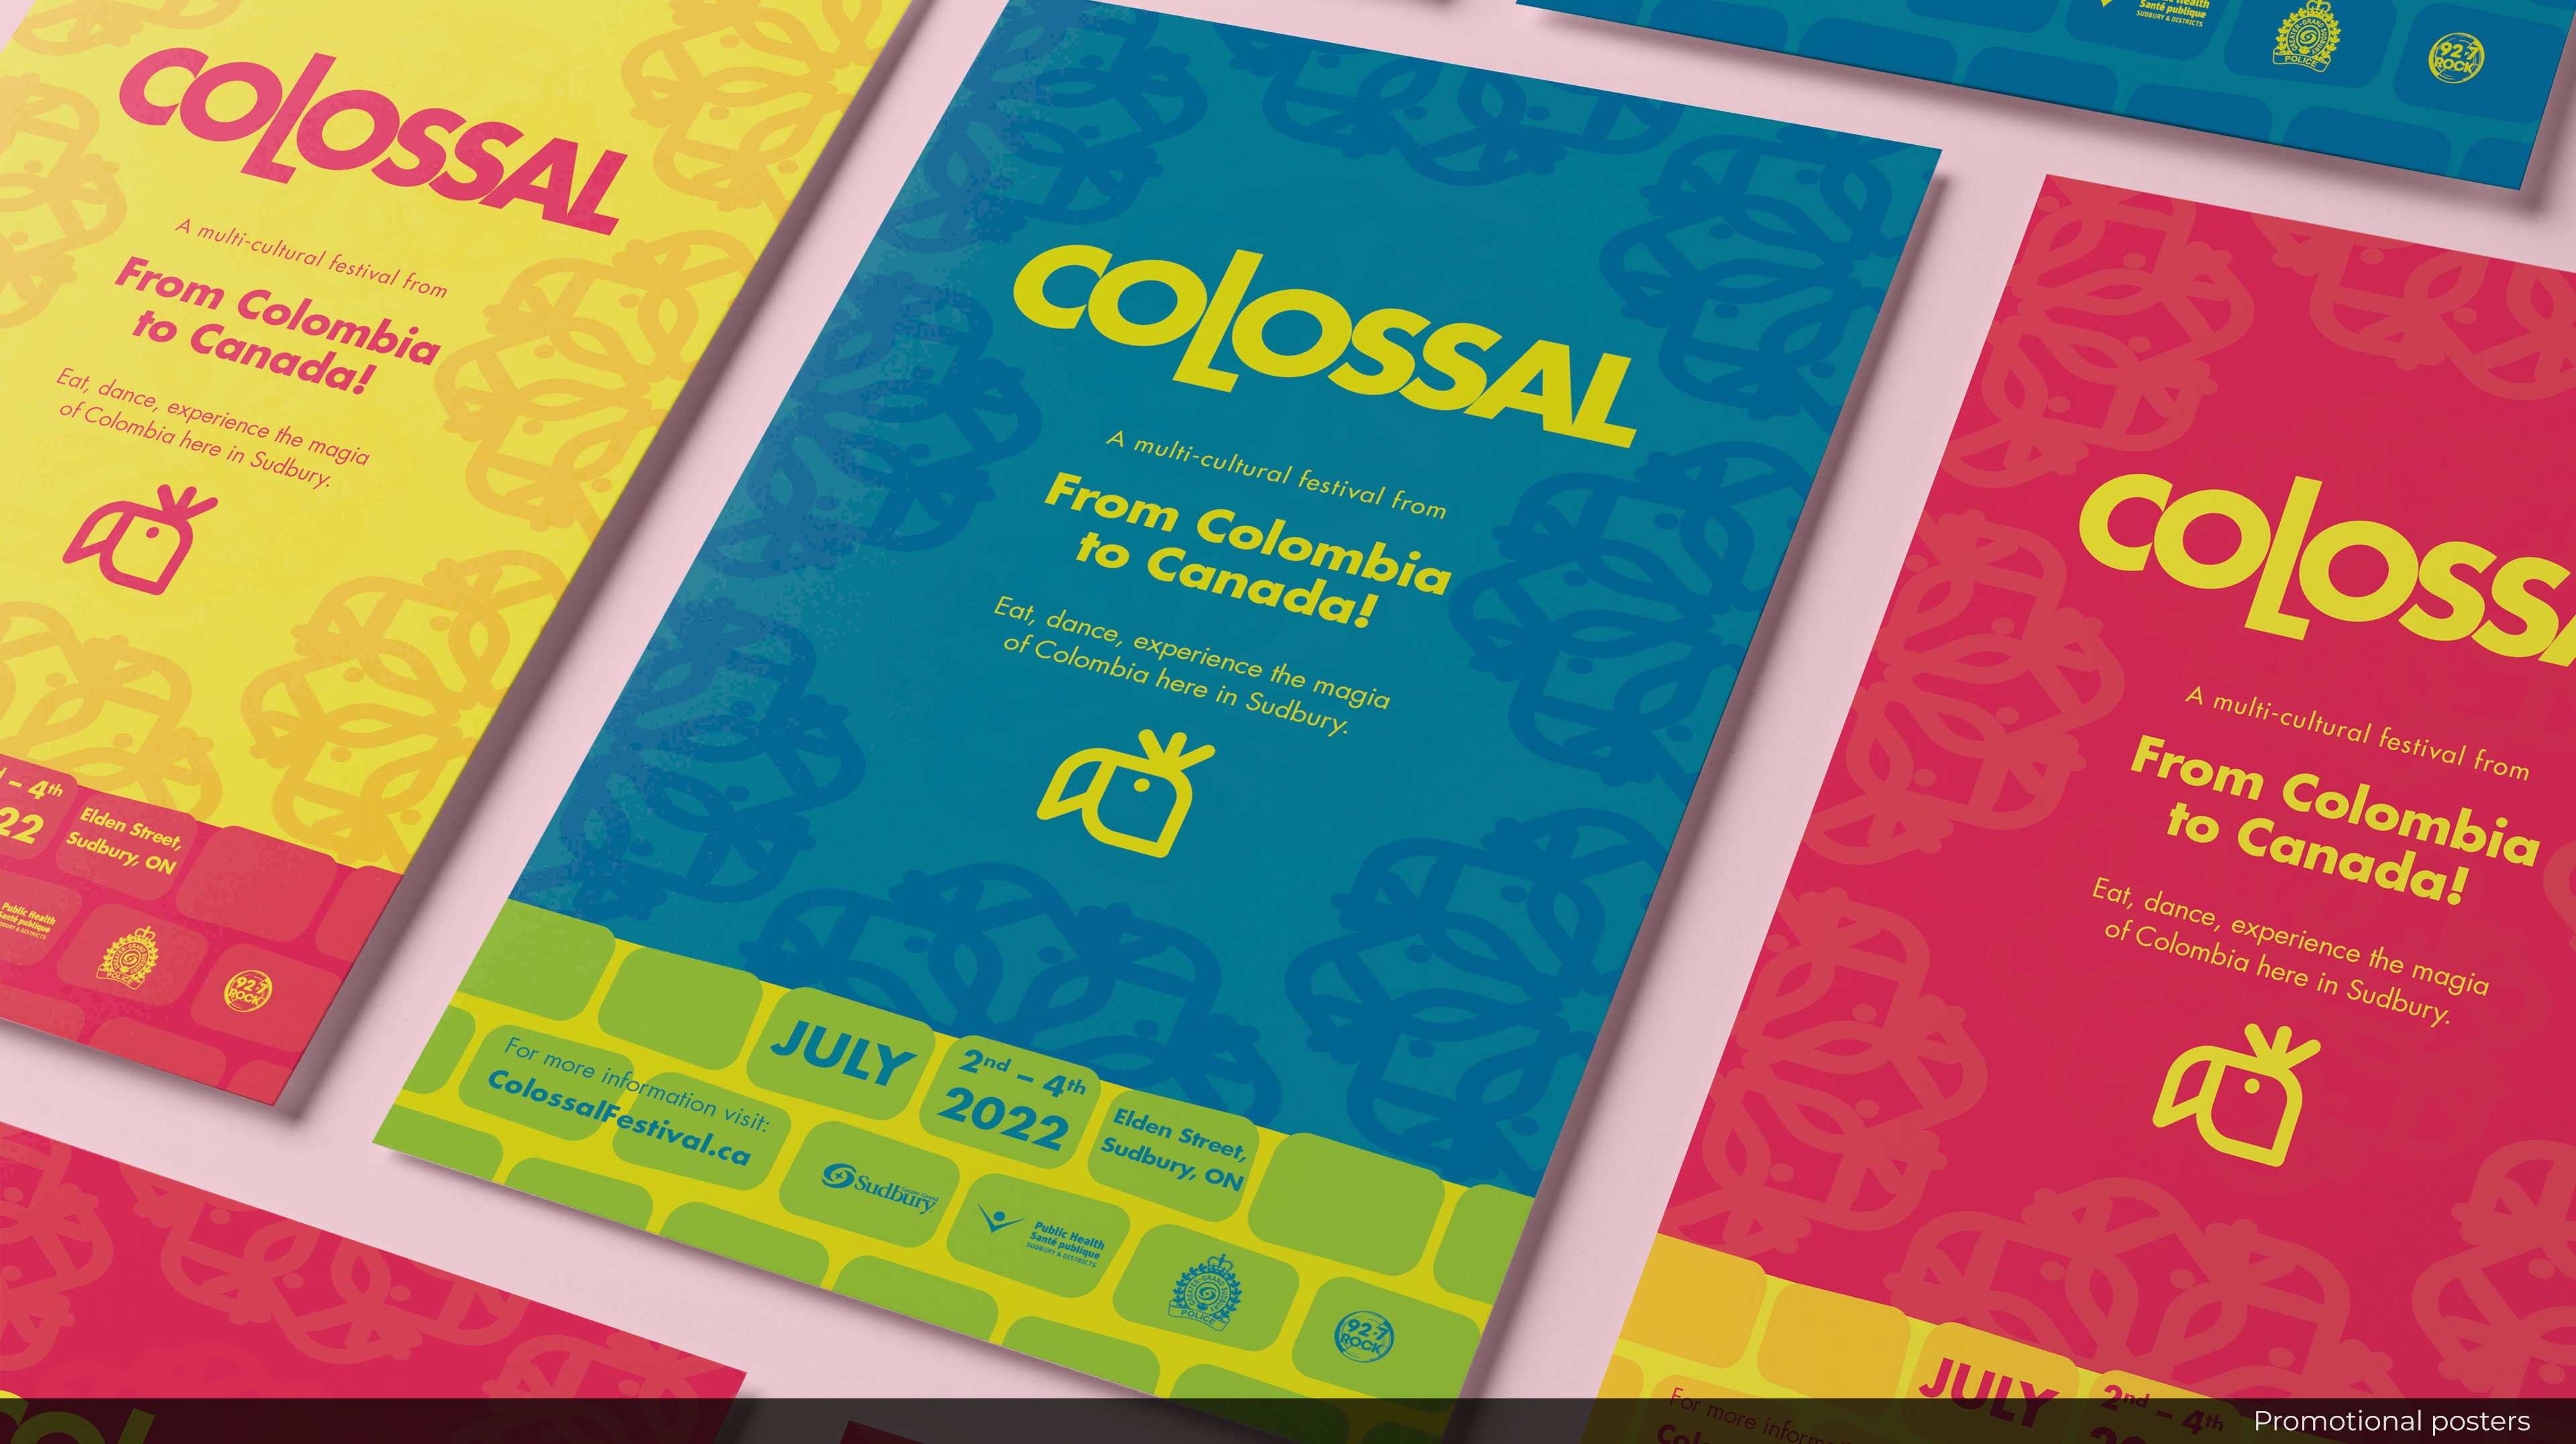 logo, colours, and graphics of colossal's brand